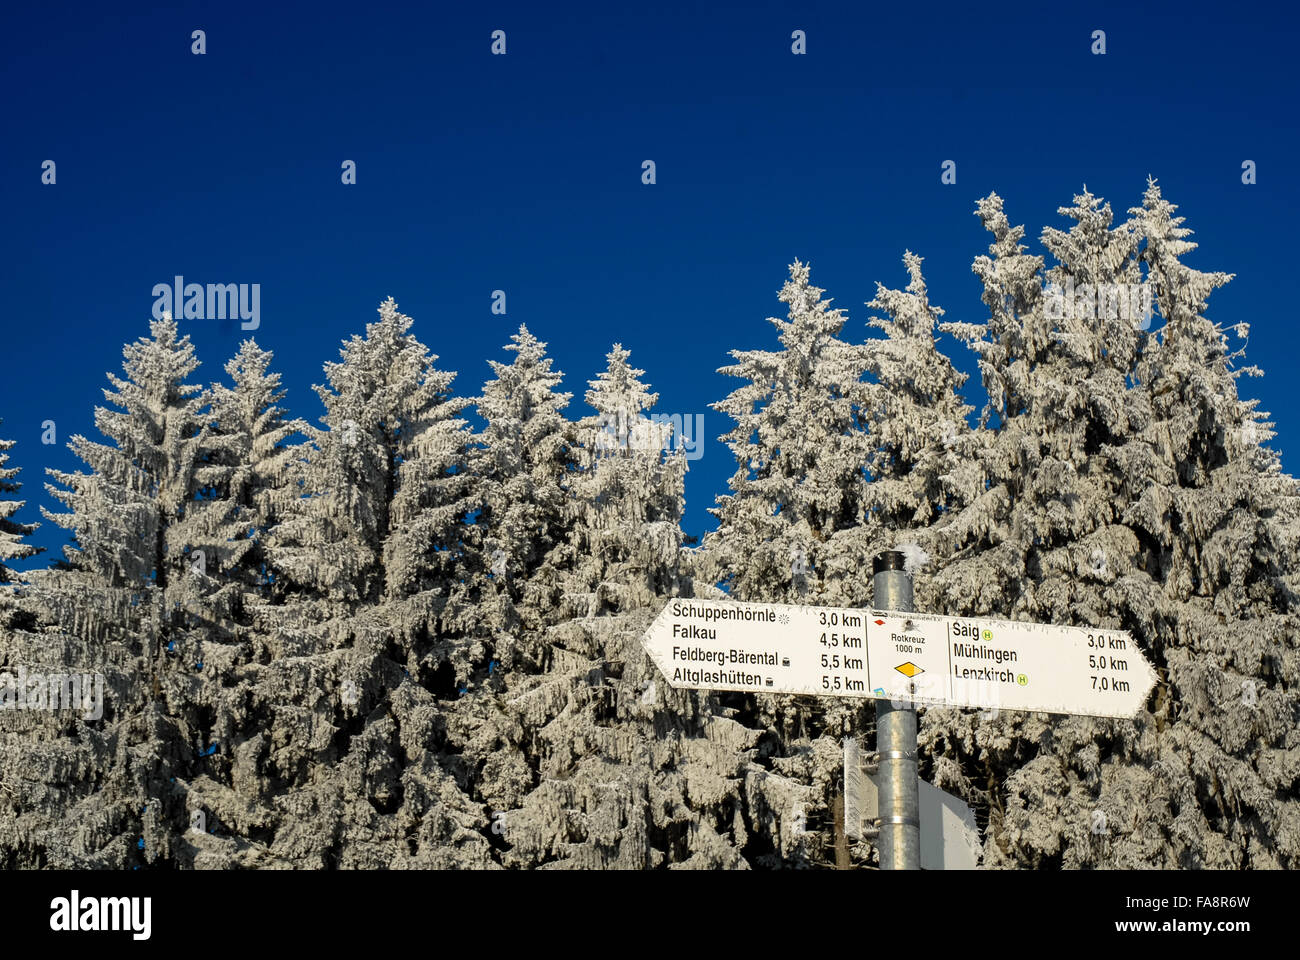 snow covered winter landscape with sign in feldberg in southern germany Stock Photo